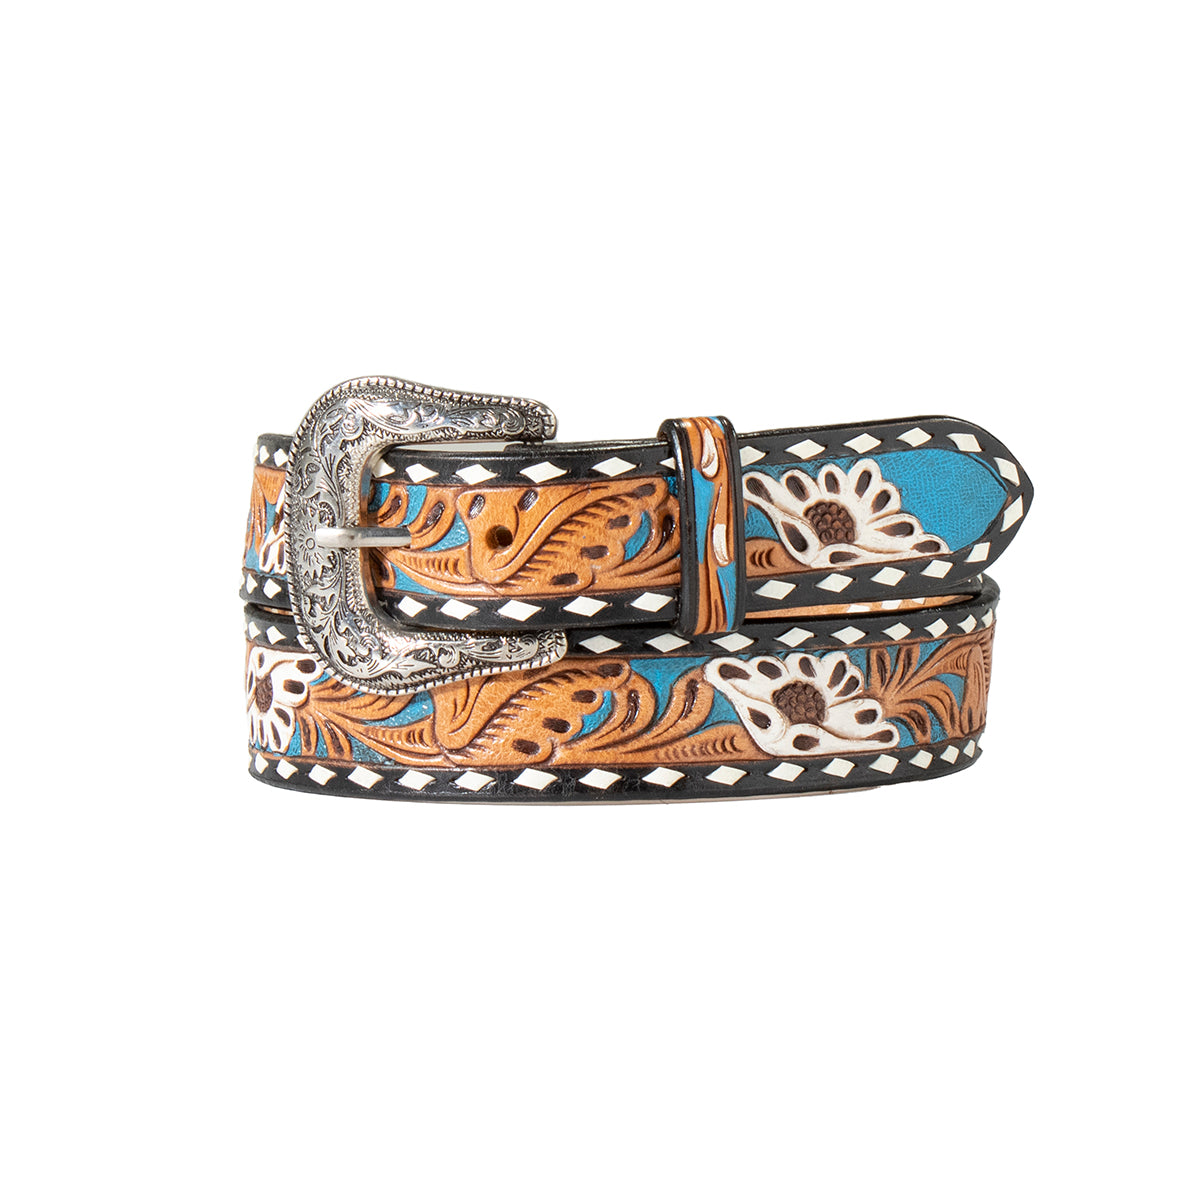 Nocona Ladies Belt 1 1/2 Hand Tooled Painted Floral Inlay Blue and Black